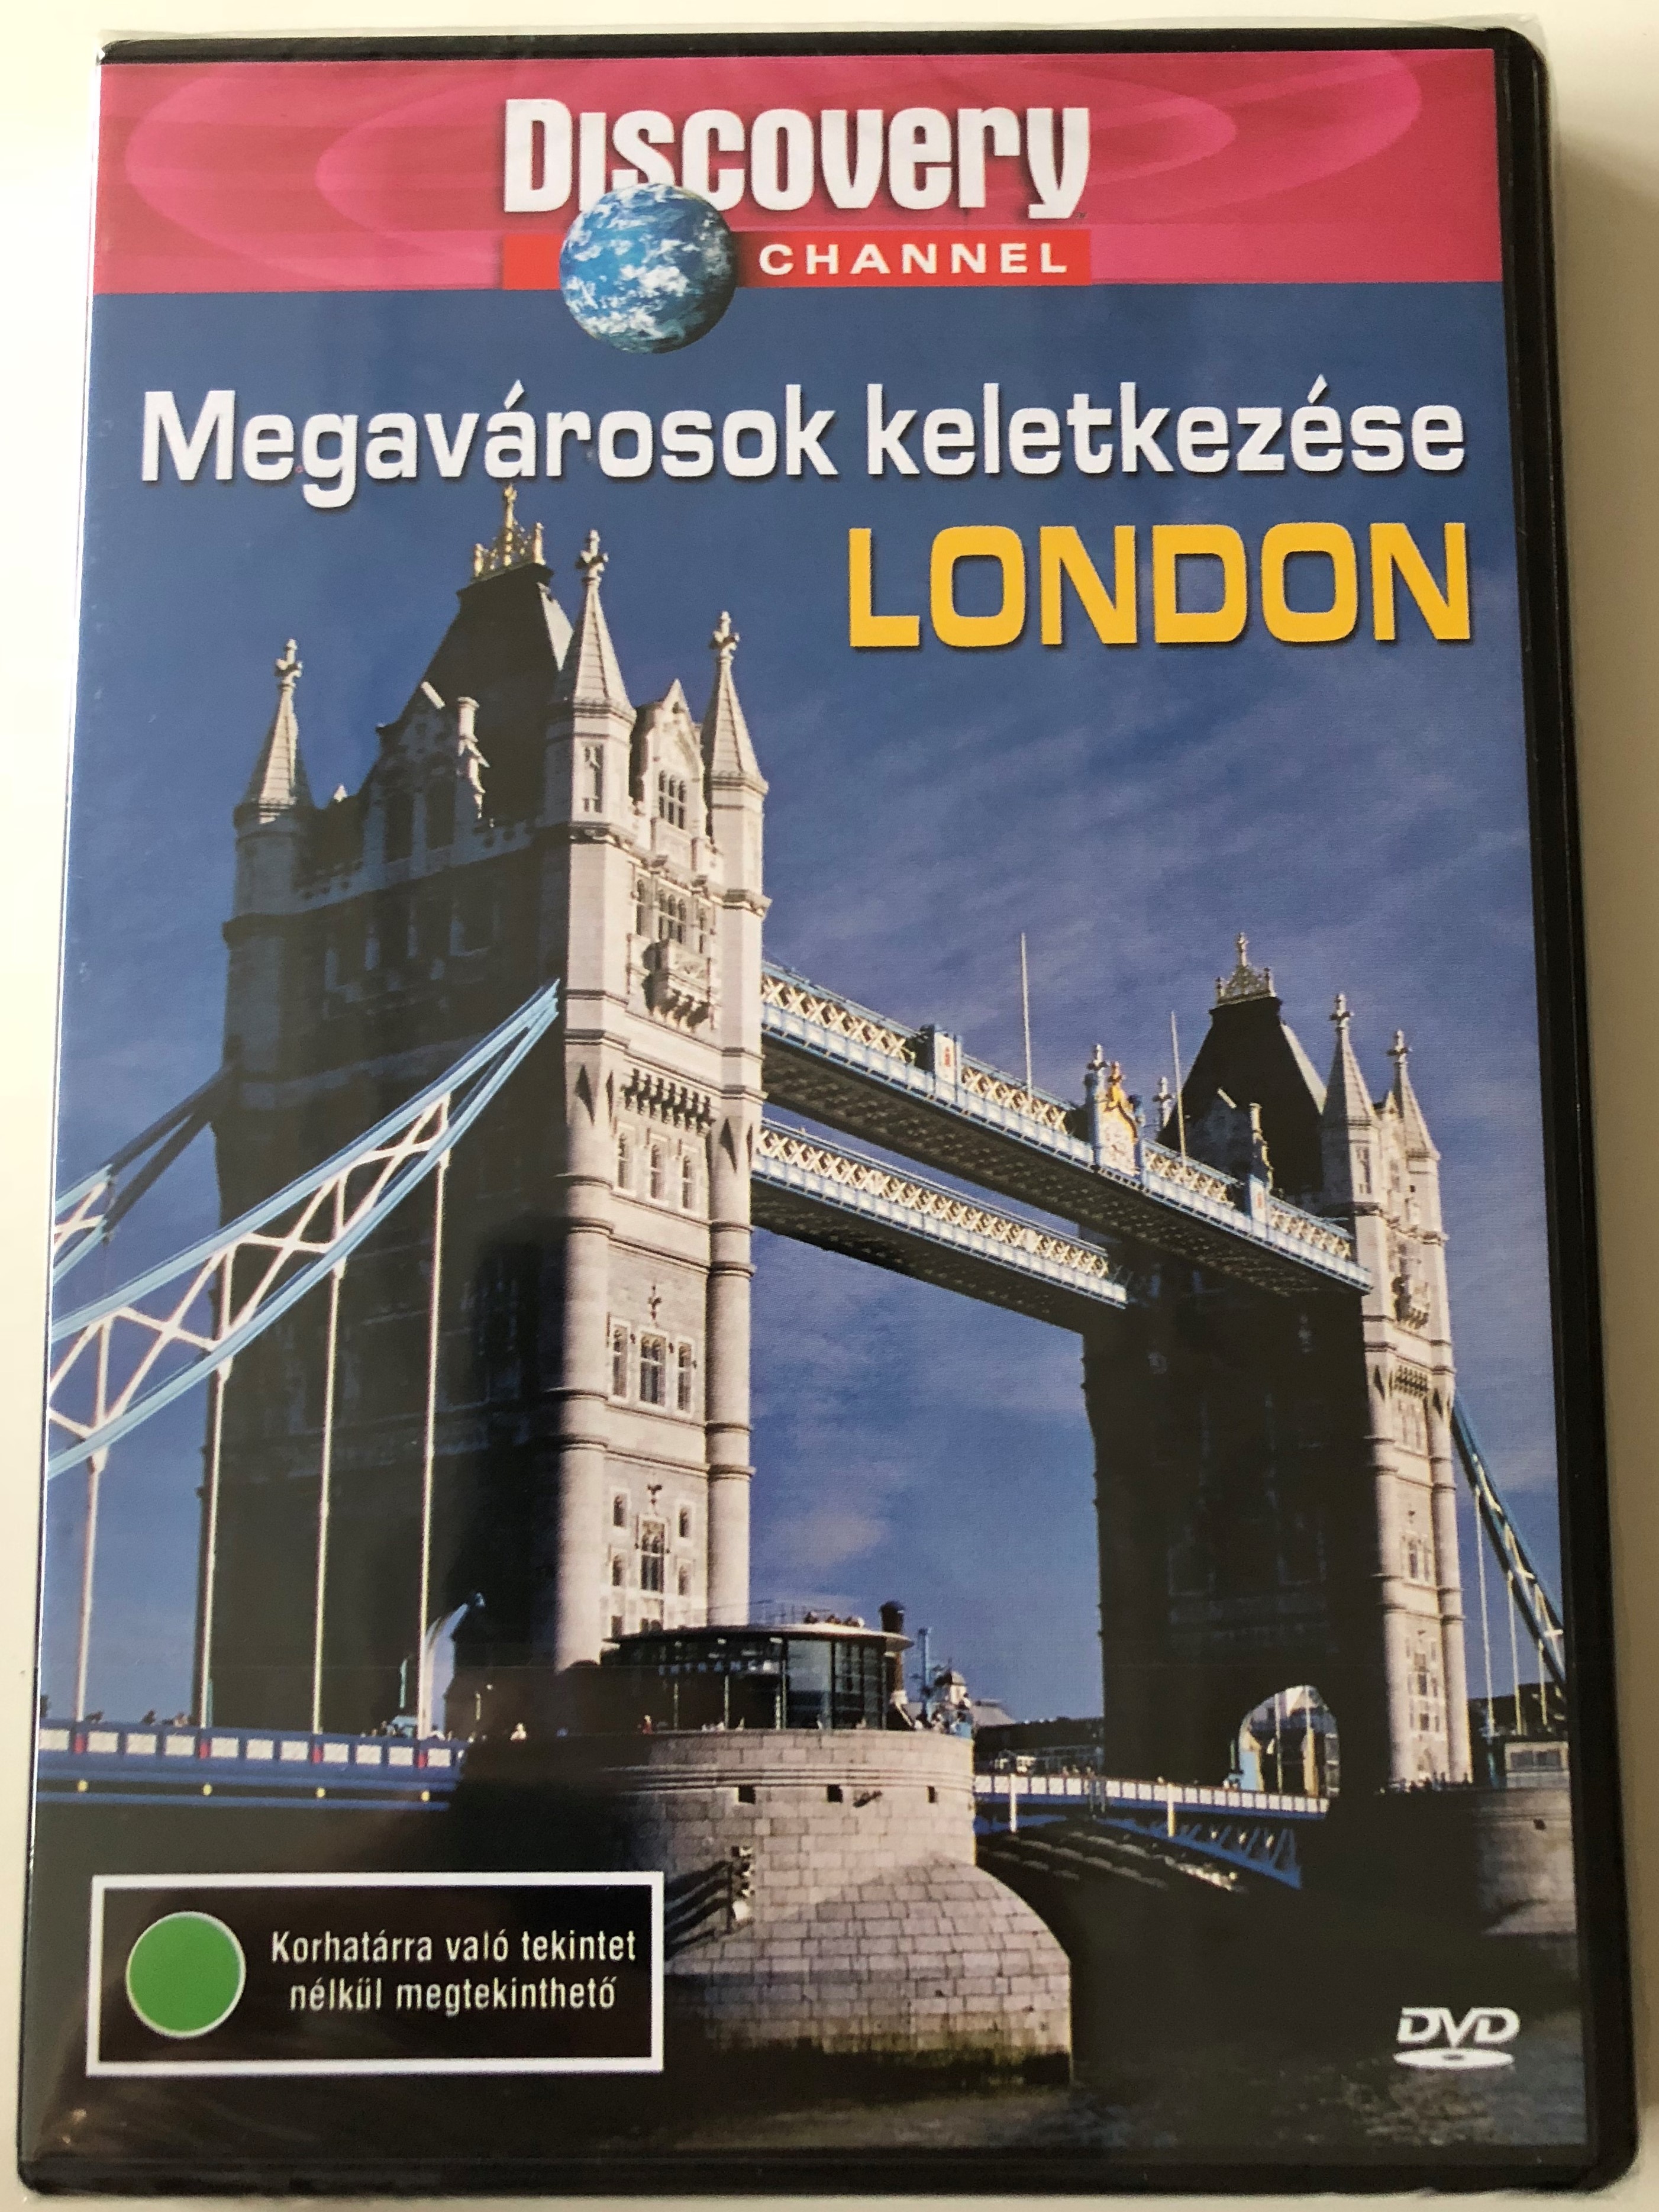 megav-rosok-keletkez-se-london-dvd-2003-we-built-this-city-london-discovery-channel-series-produced-and-directed-by-paul-burgess-1-.jpg